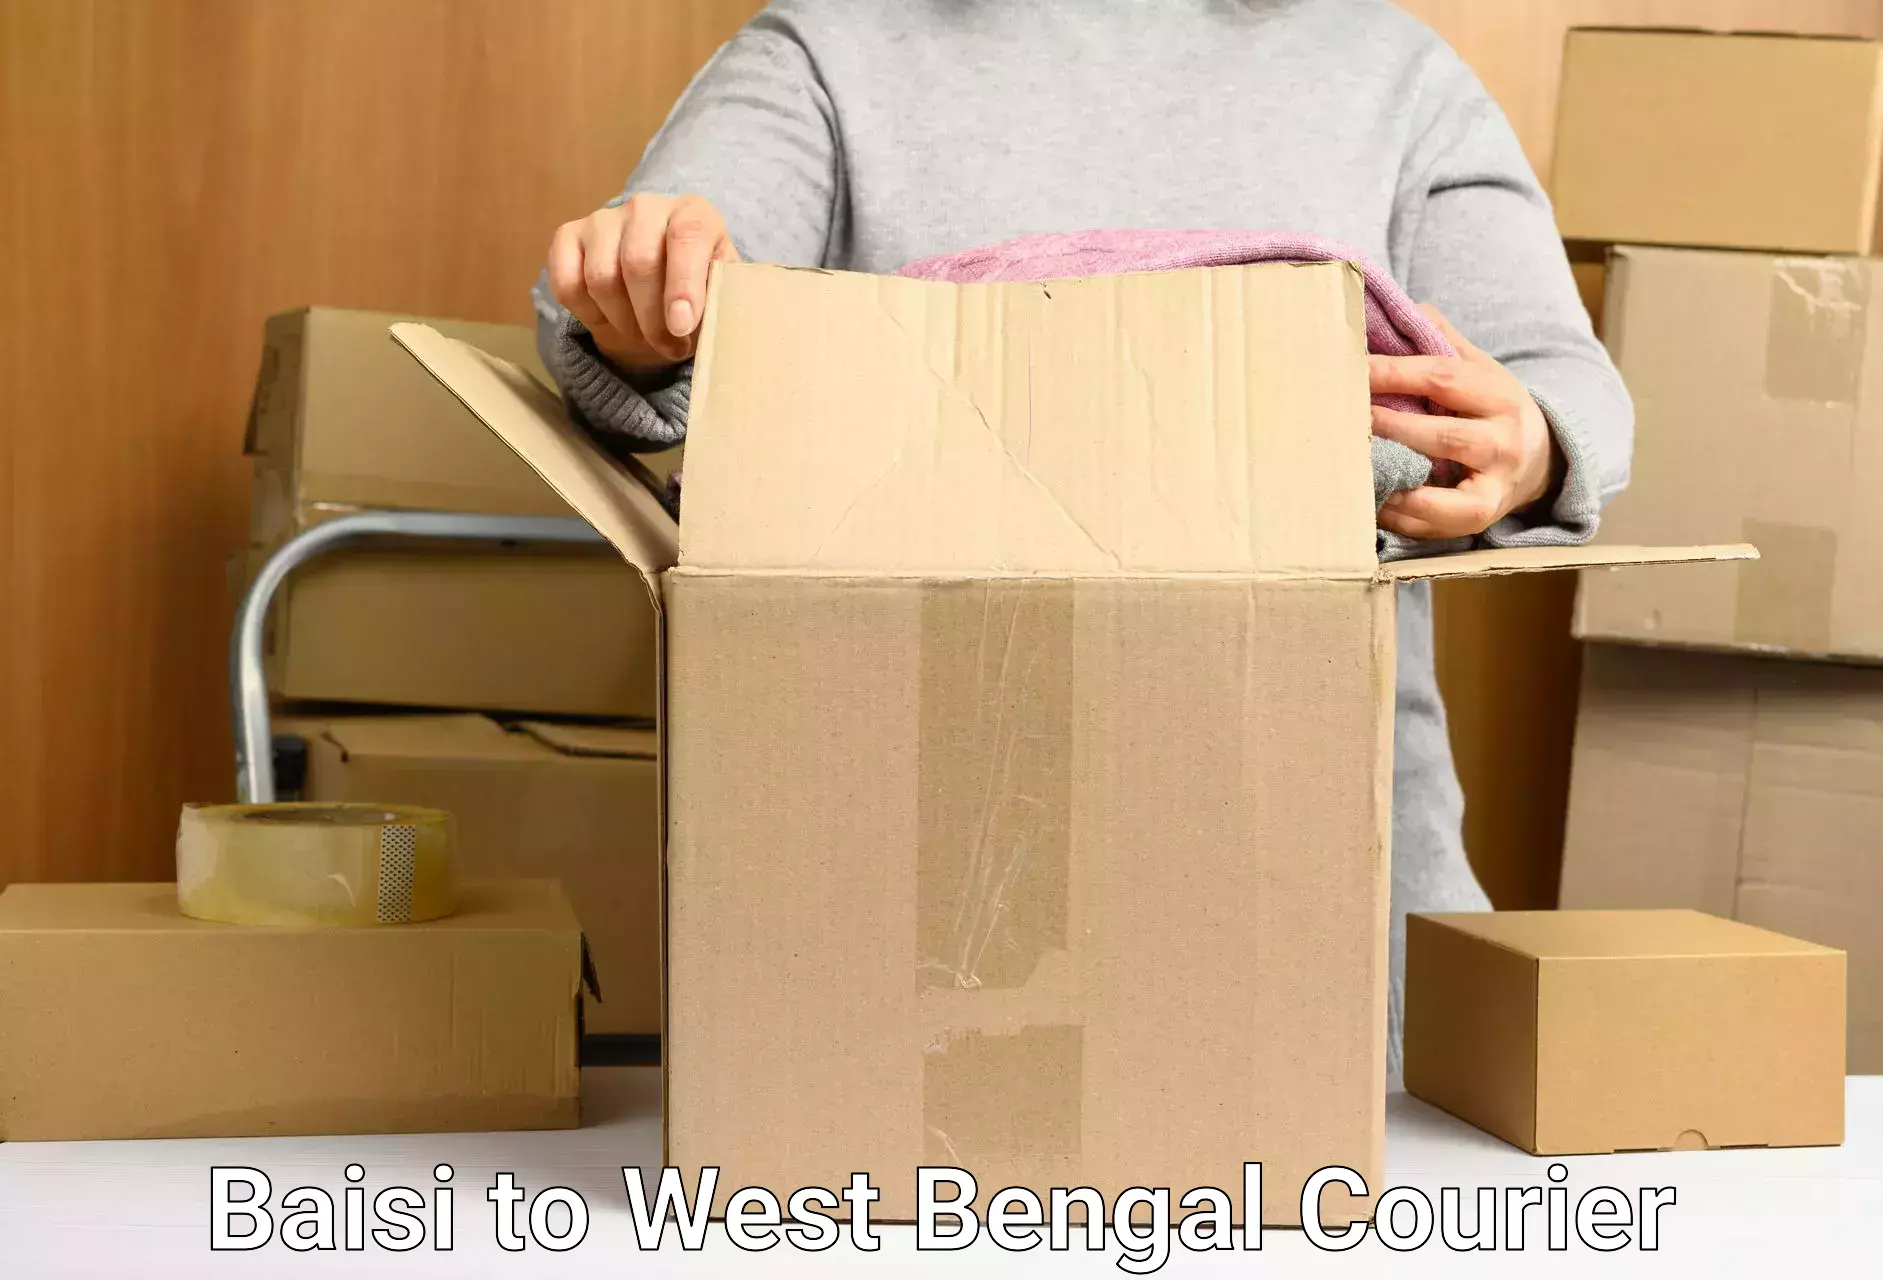 Courier service booking Baisi to West Bengal